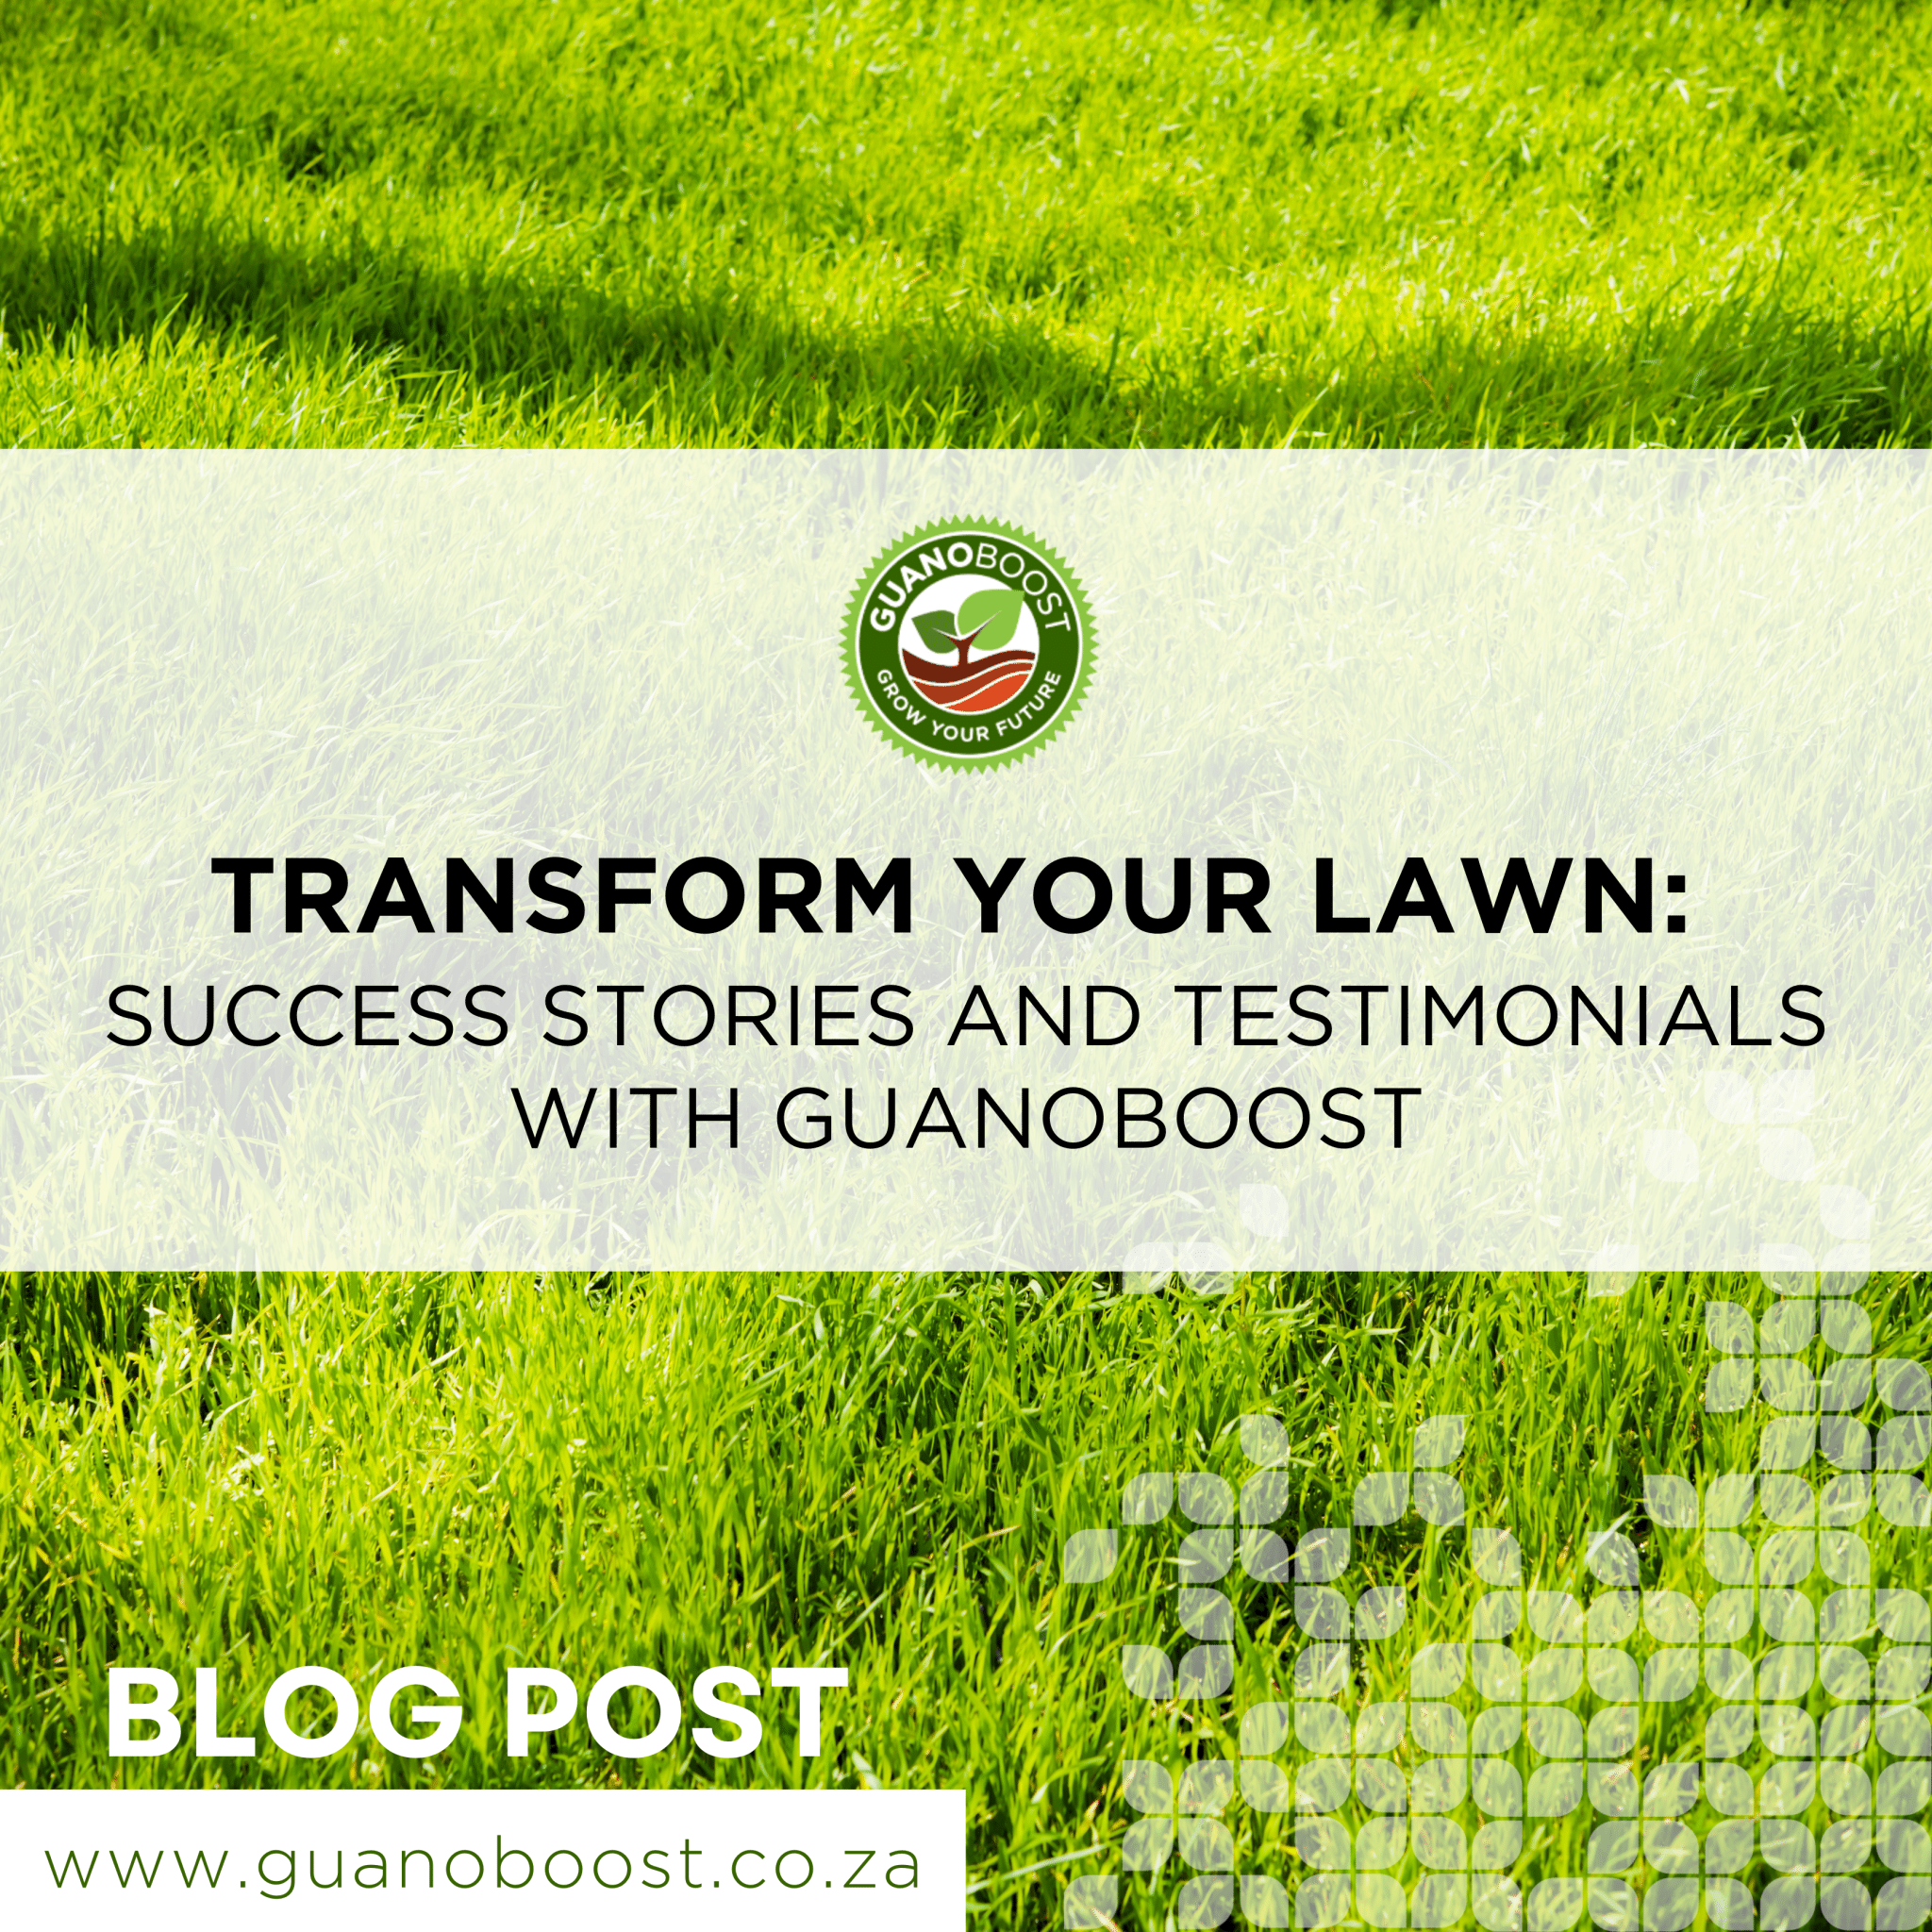 Explore the GuanoBoost Chronicles: Stories of Lawn Transformation - GuanoBoost